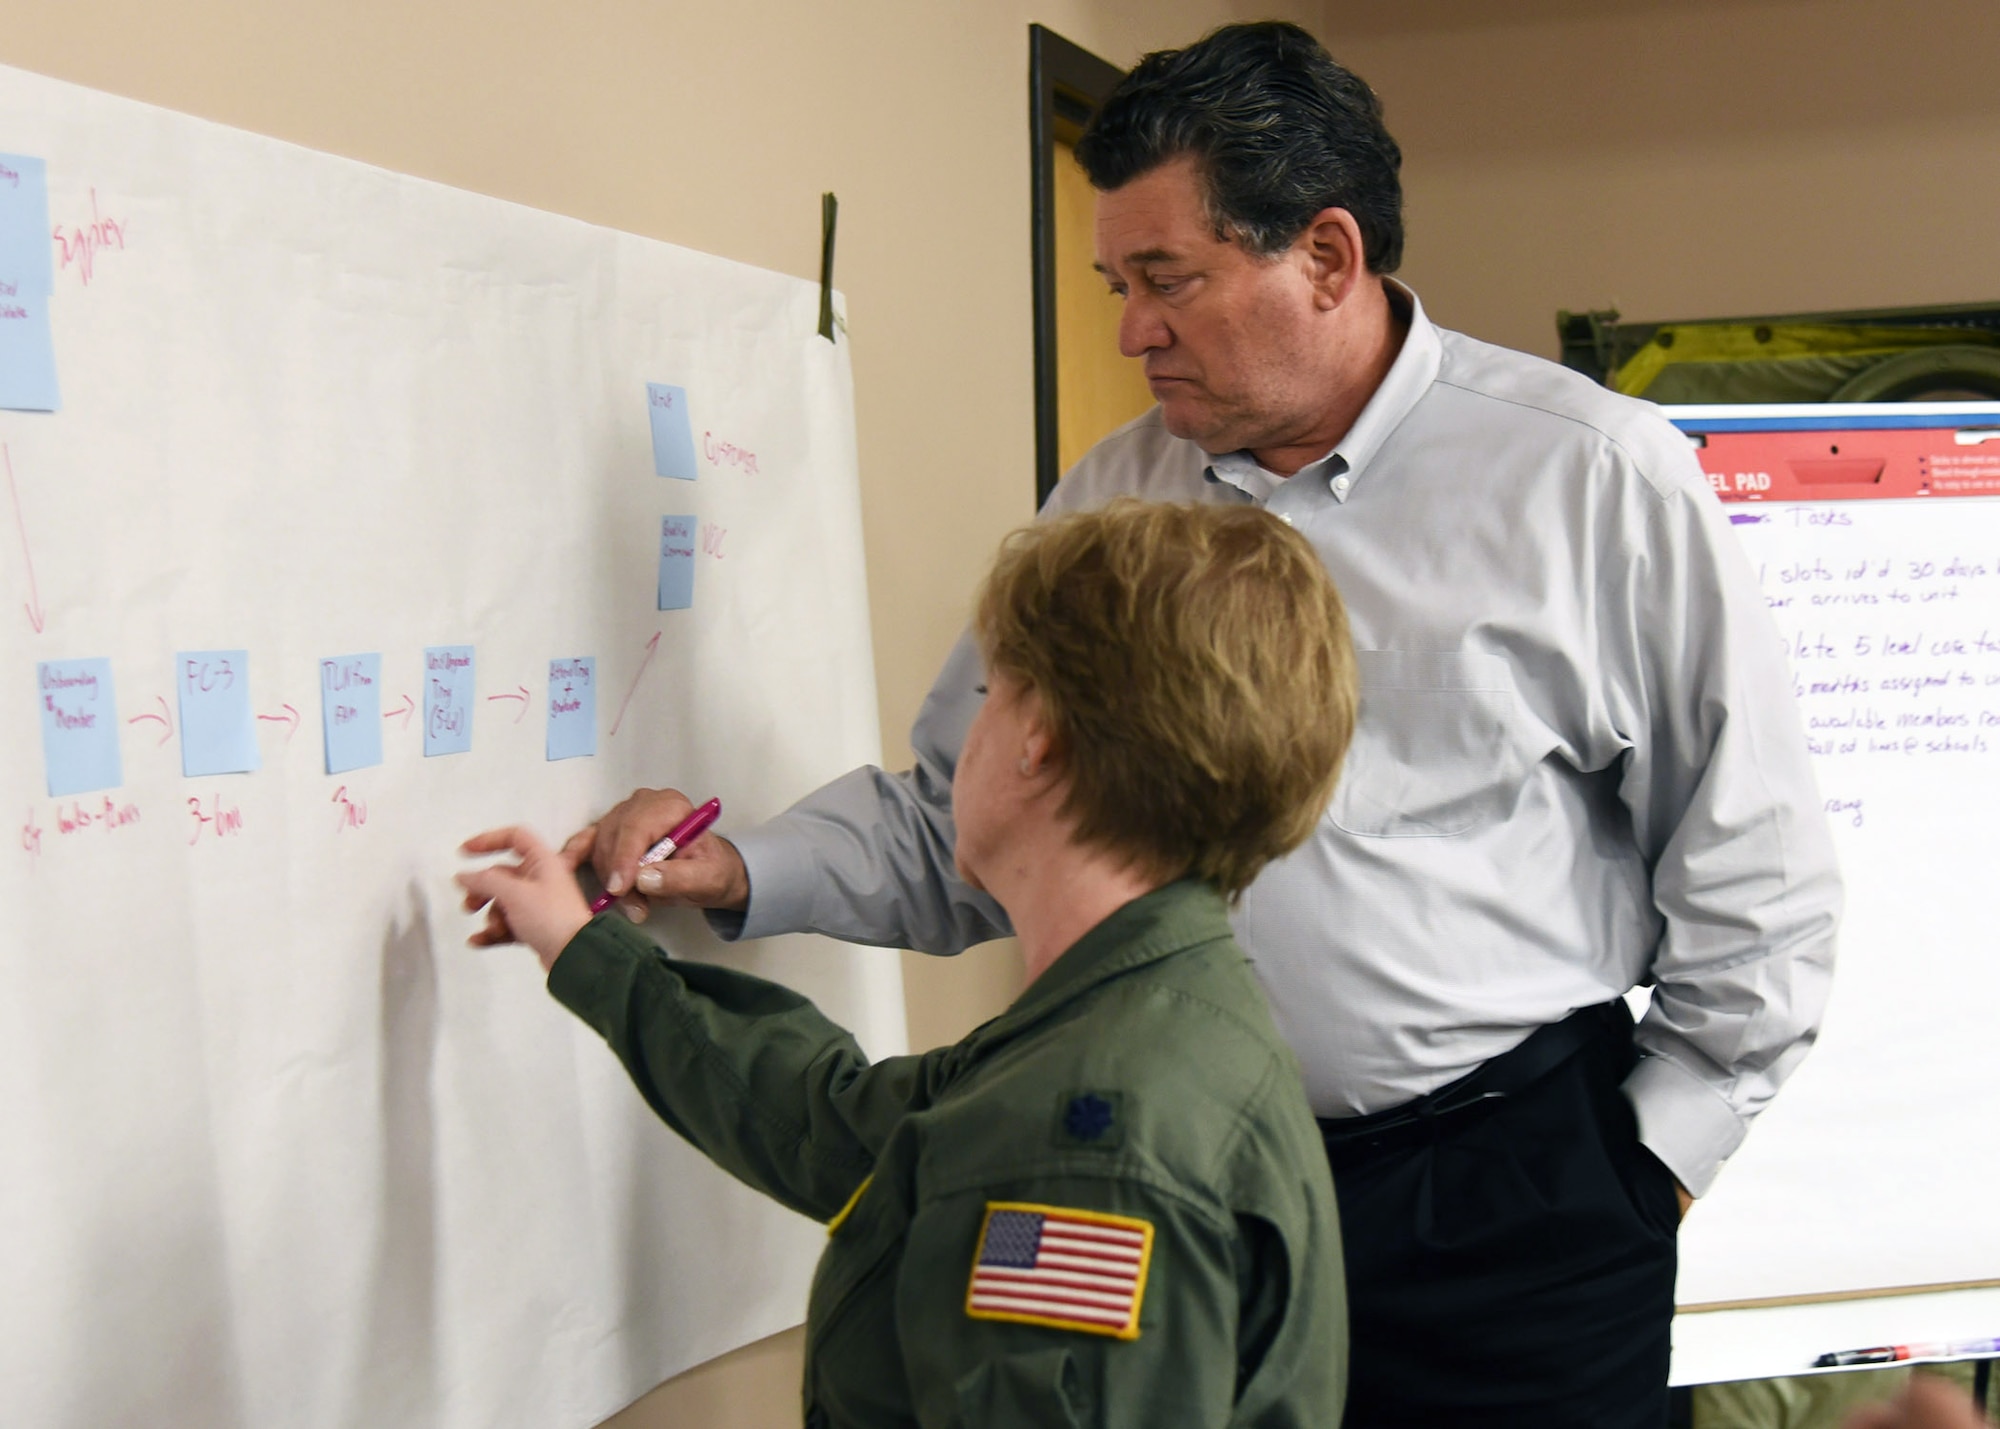 A man and Airman write on a large sheet of paper on the wall